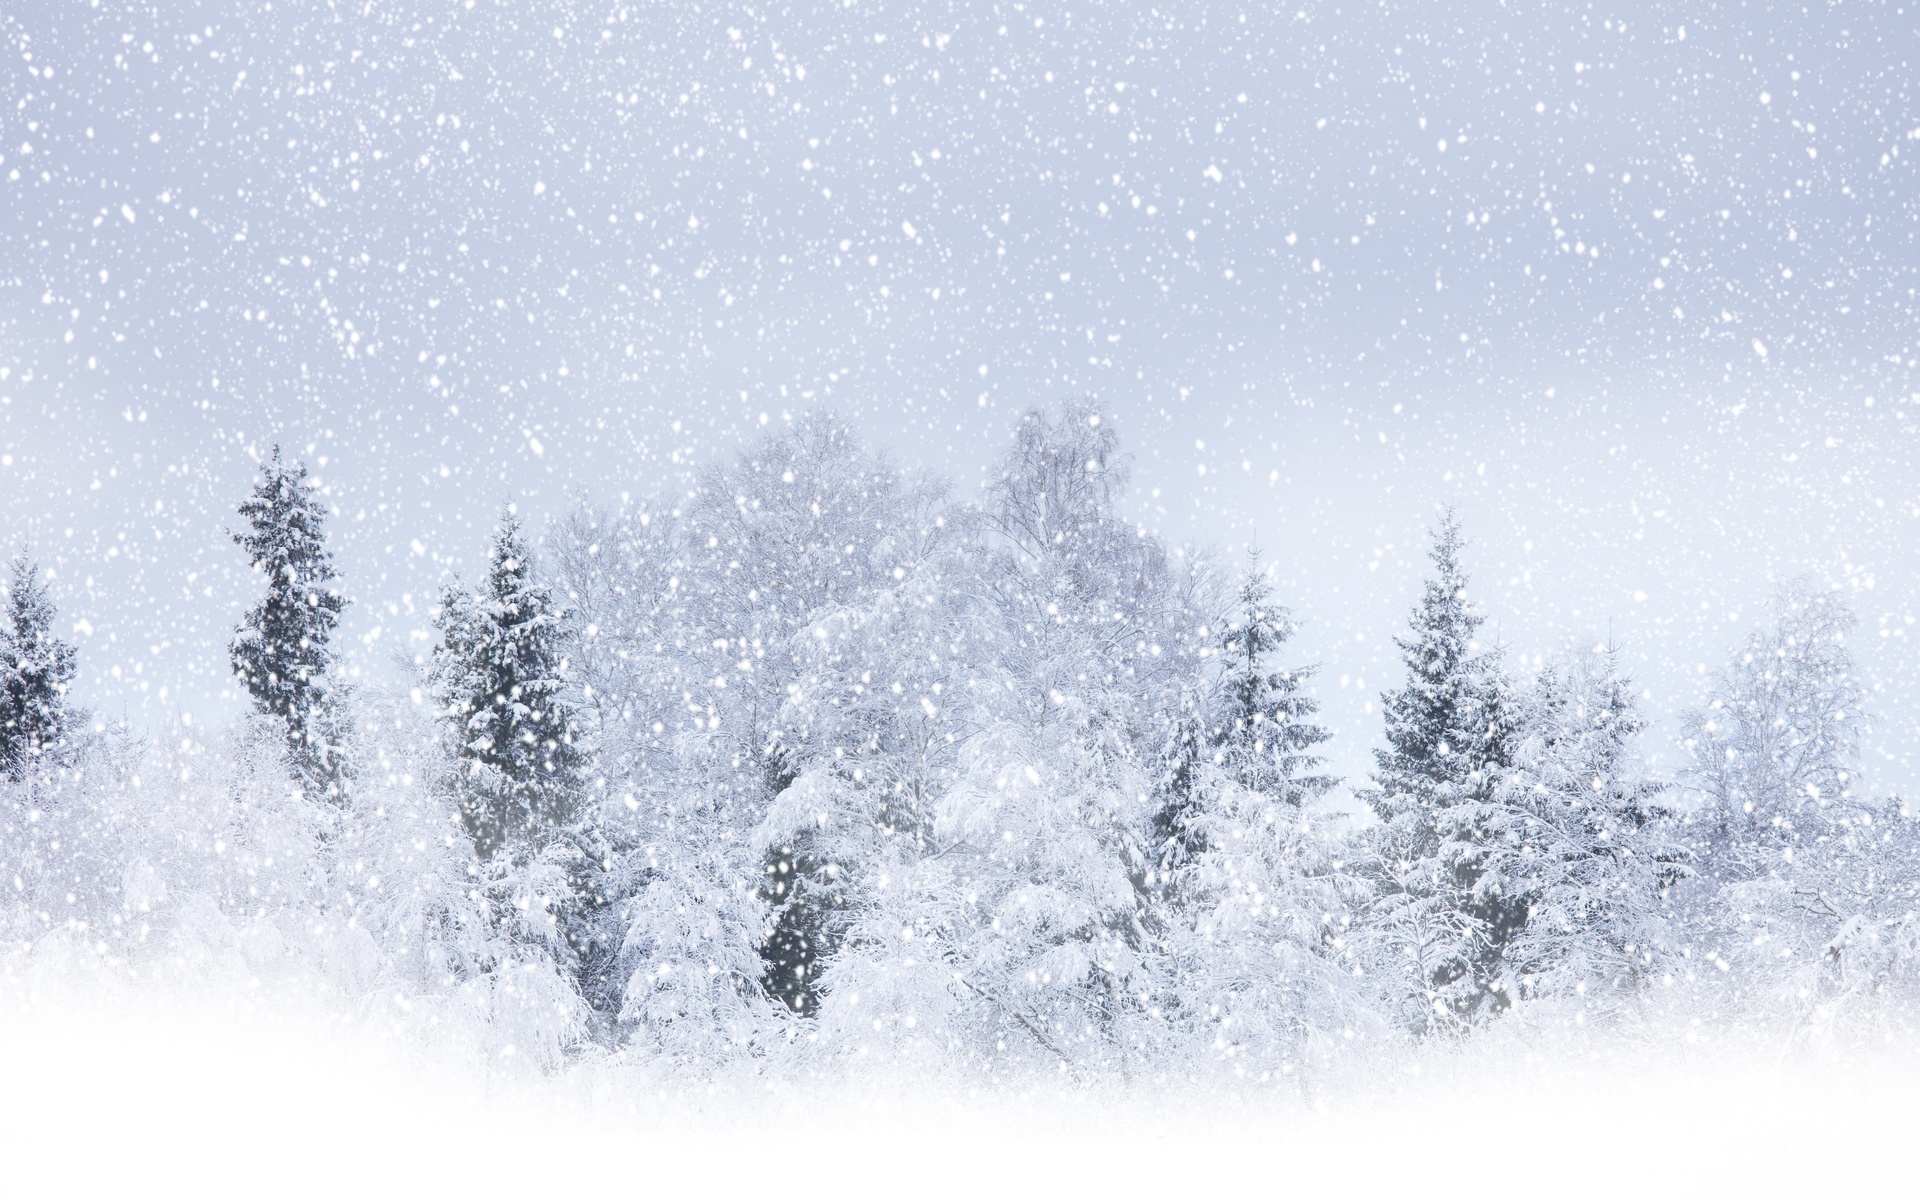 nature, Landscapes, Trees, Forest, Winter, Snow, Seasons, Snowing, Snowfall, Flakes, Blizzard, Storm, White Wallpaper